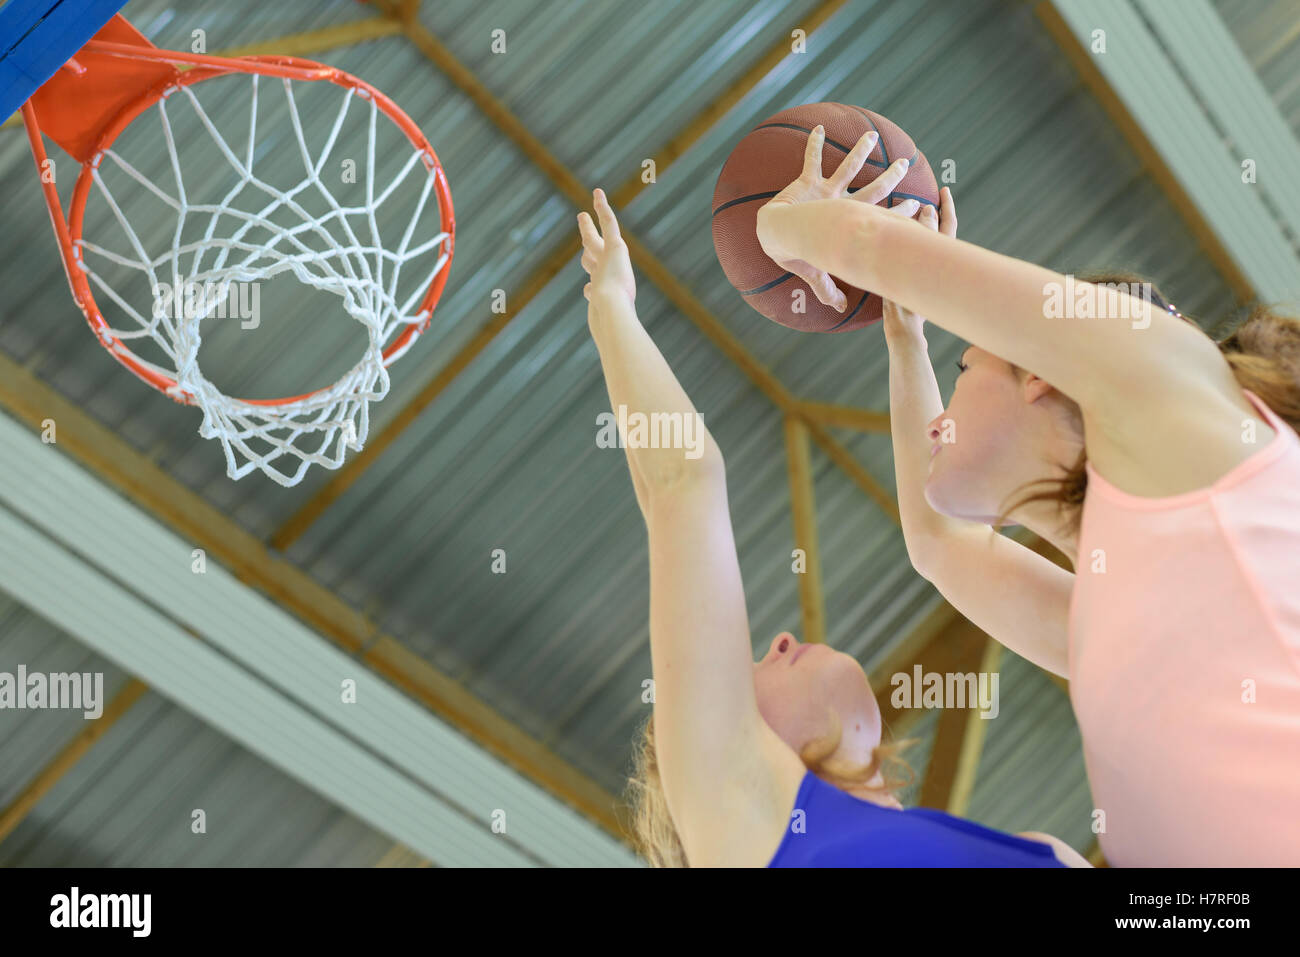 Lady aiming for basketball hoop Stock Photo